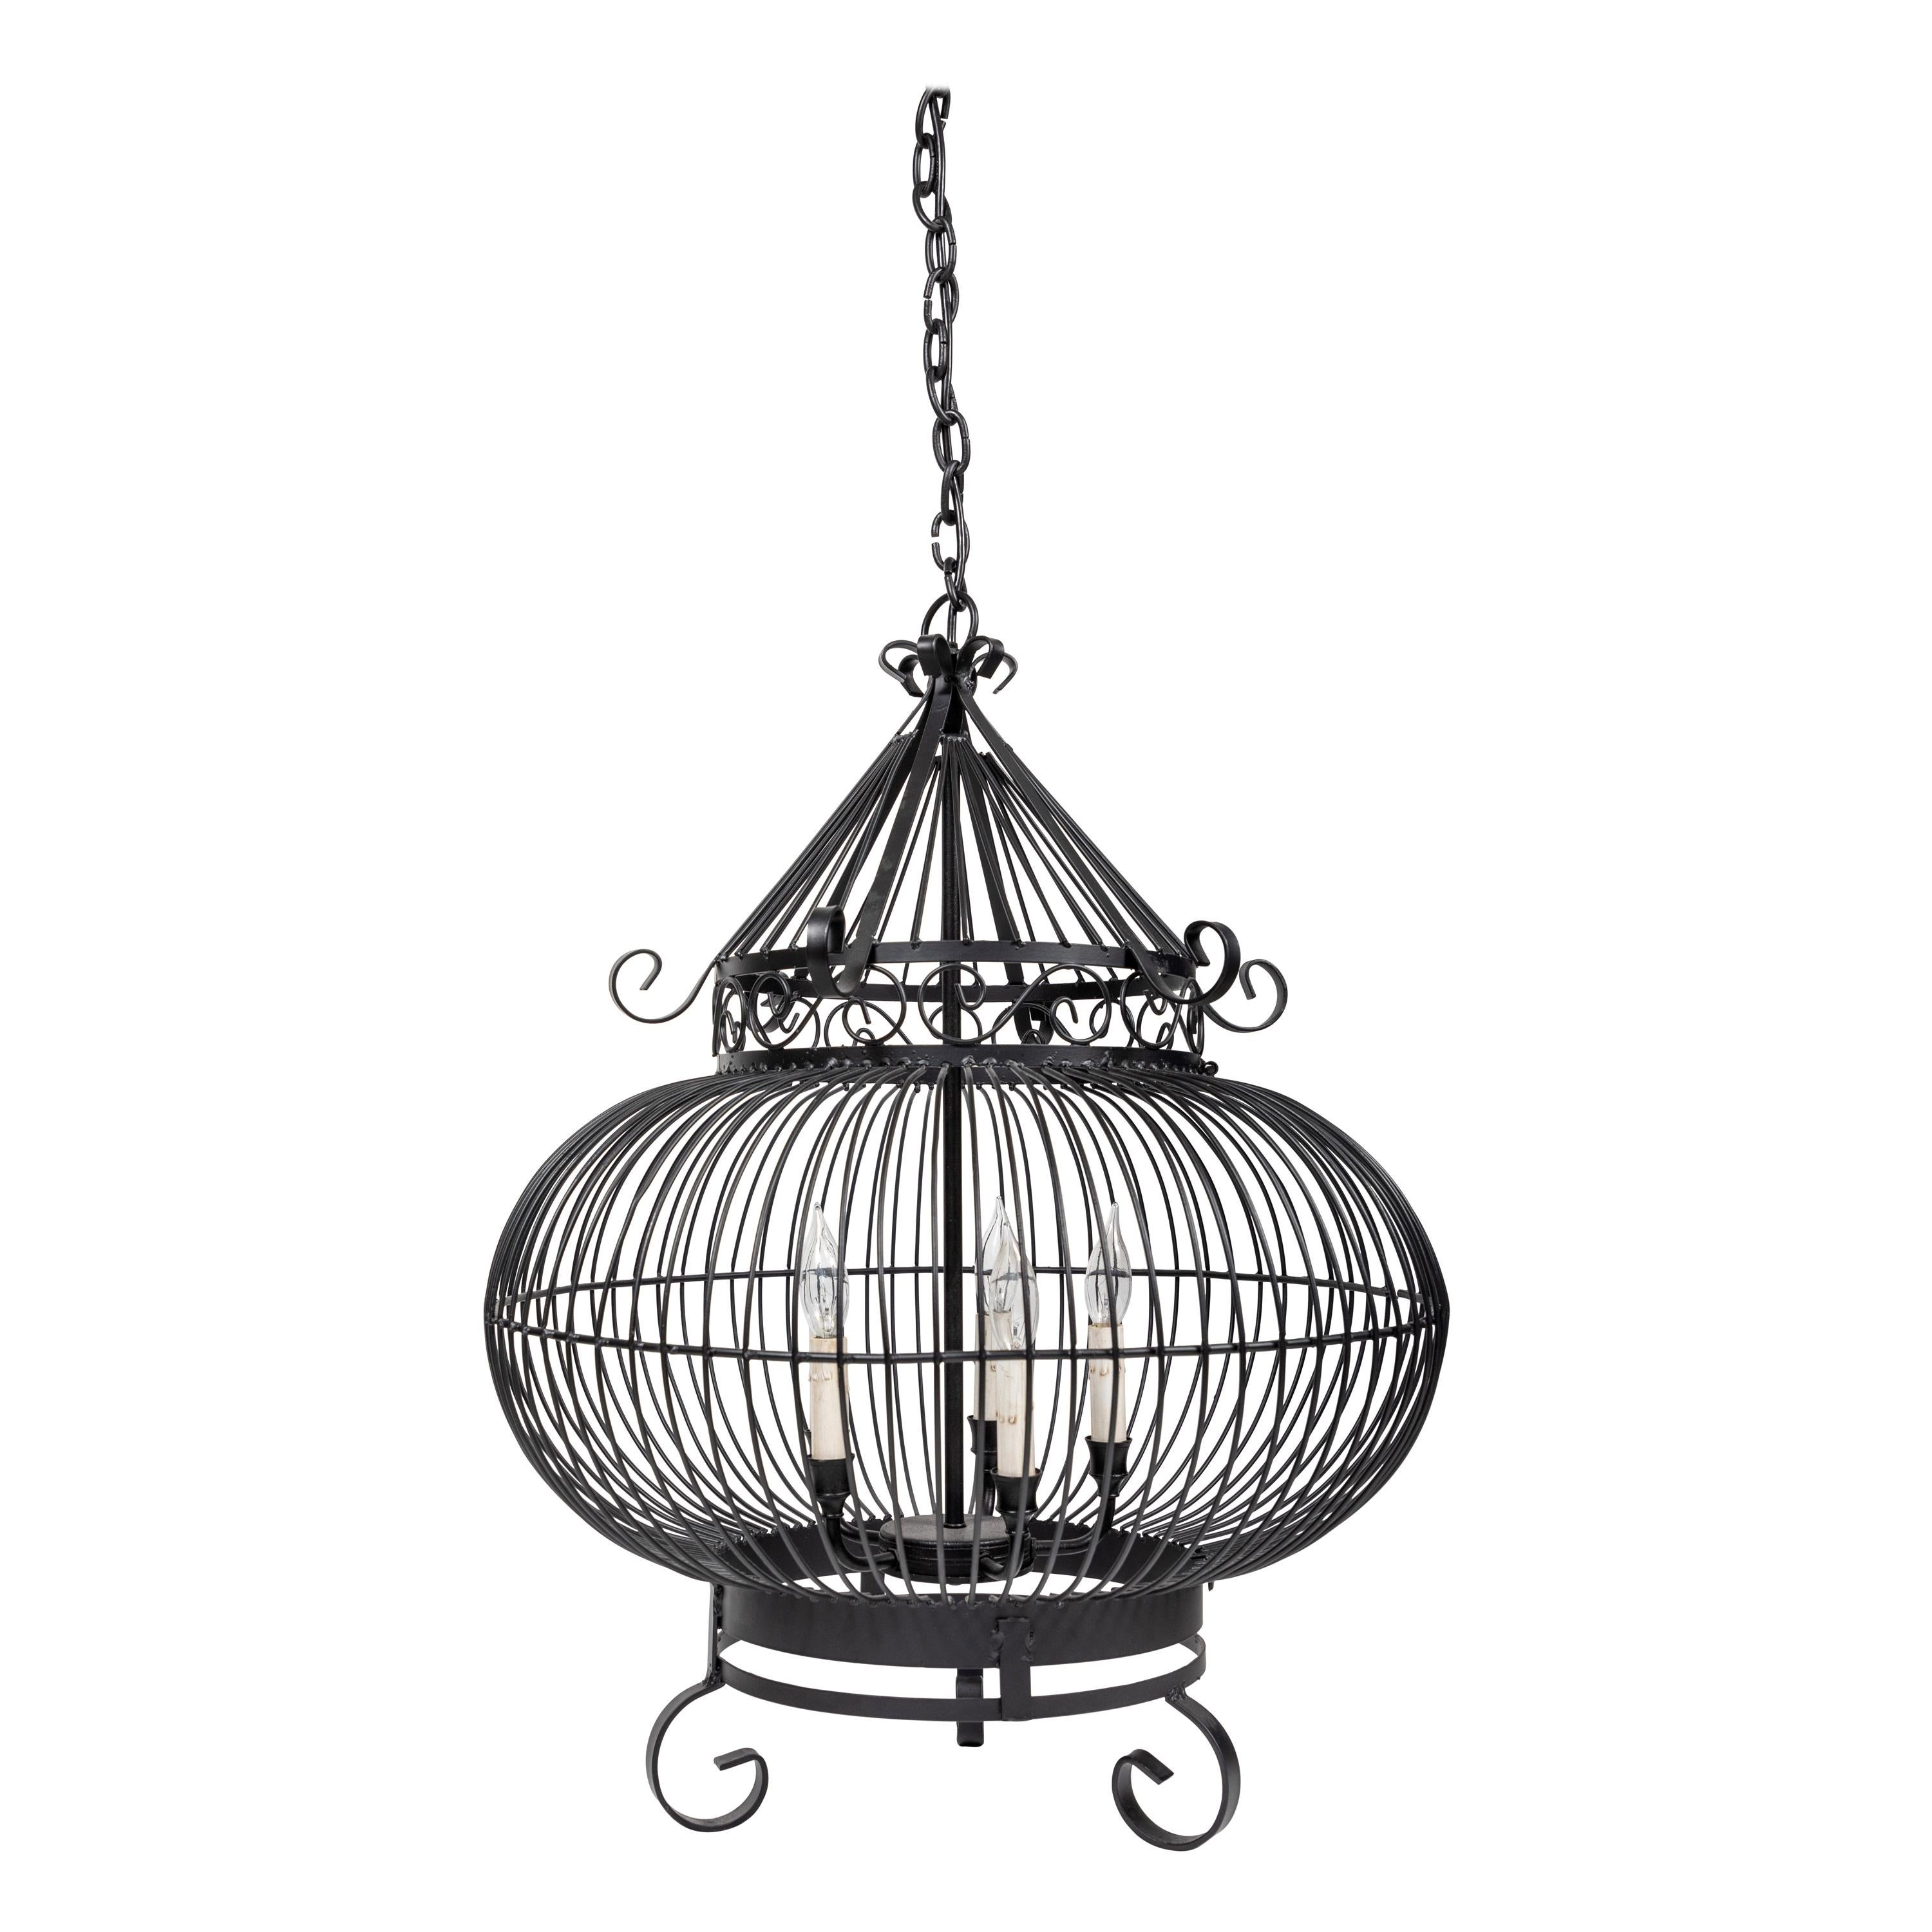 Vintage Wrought Iron Birdcage Hanging Light For Sale